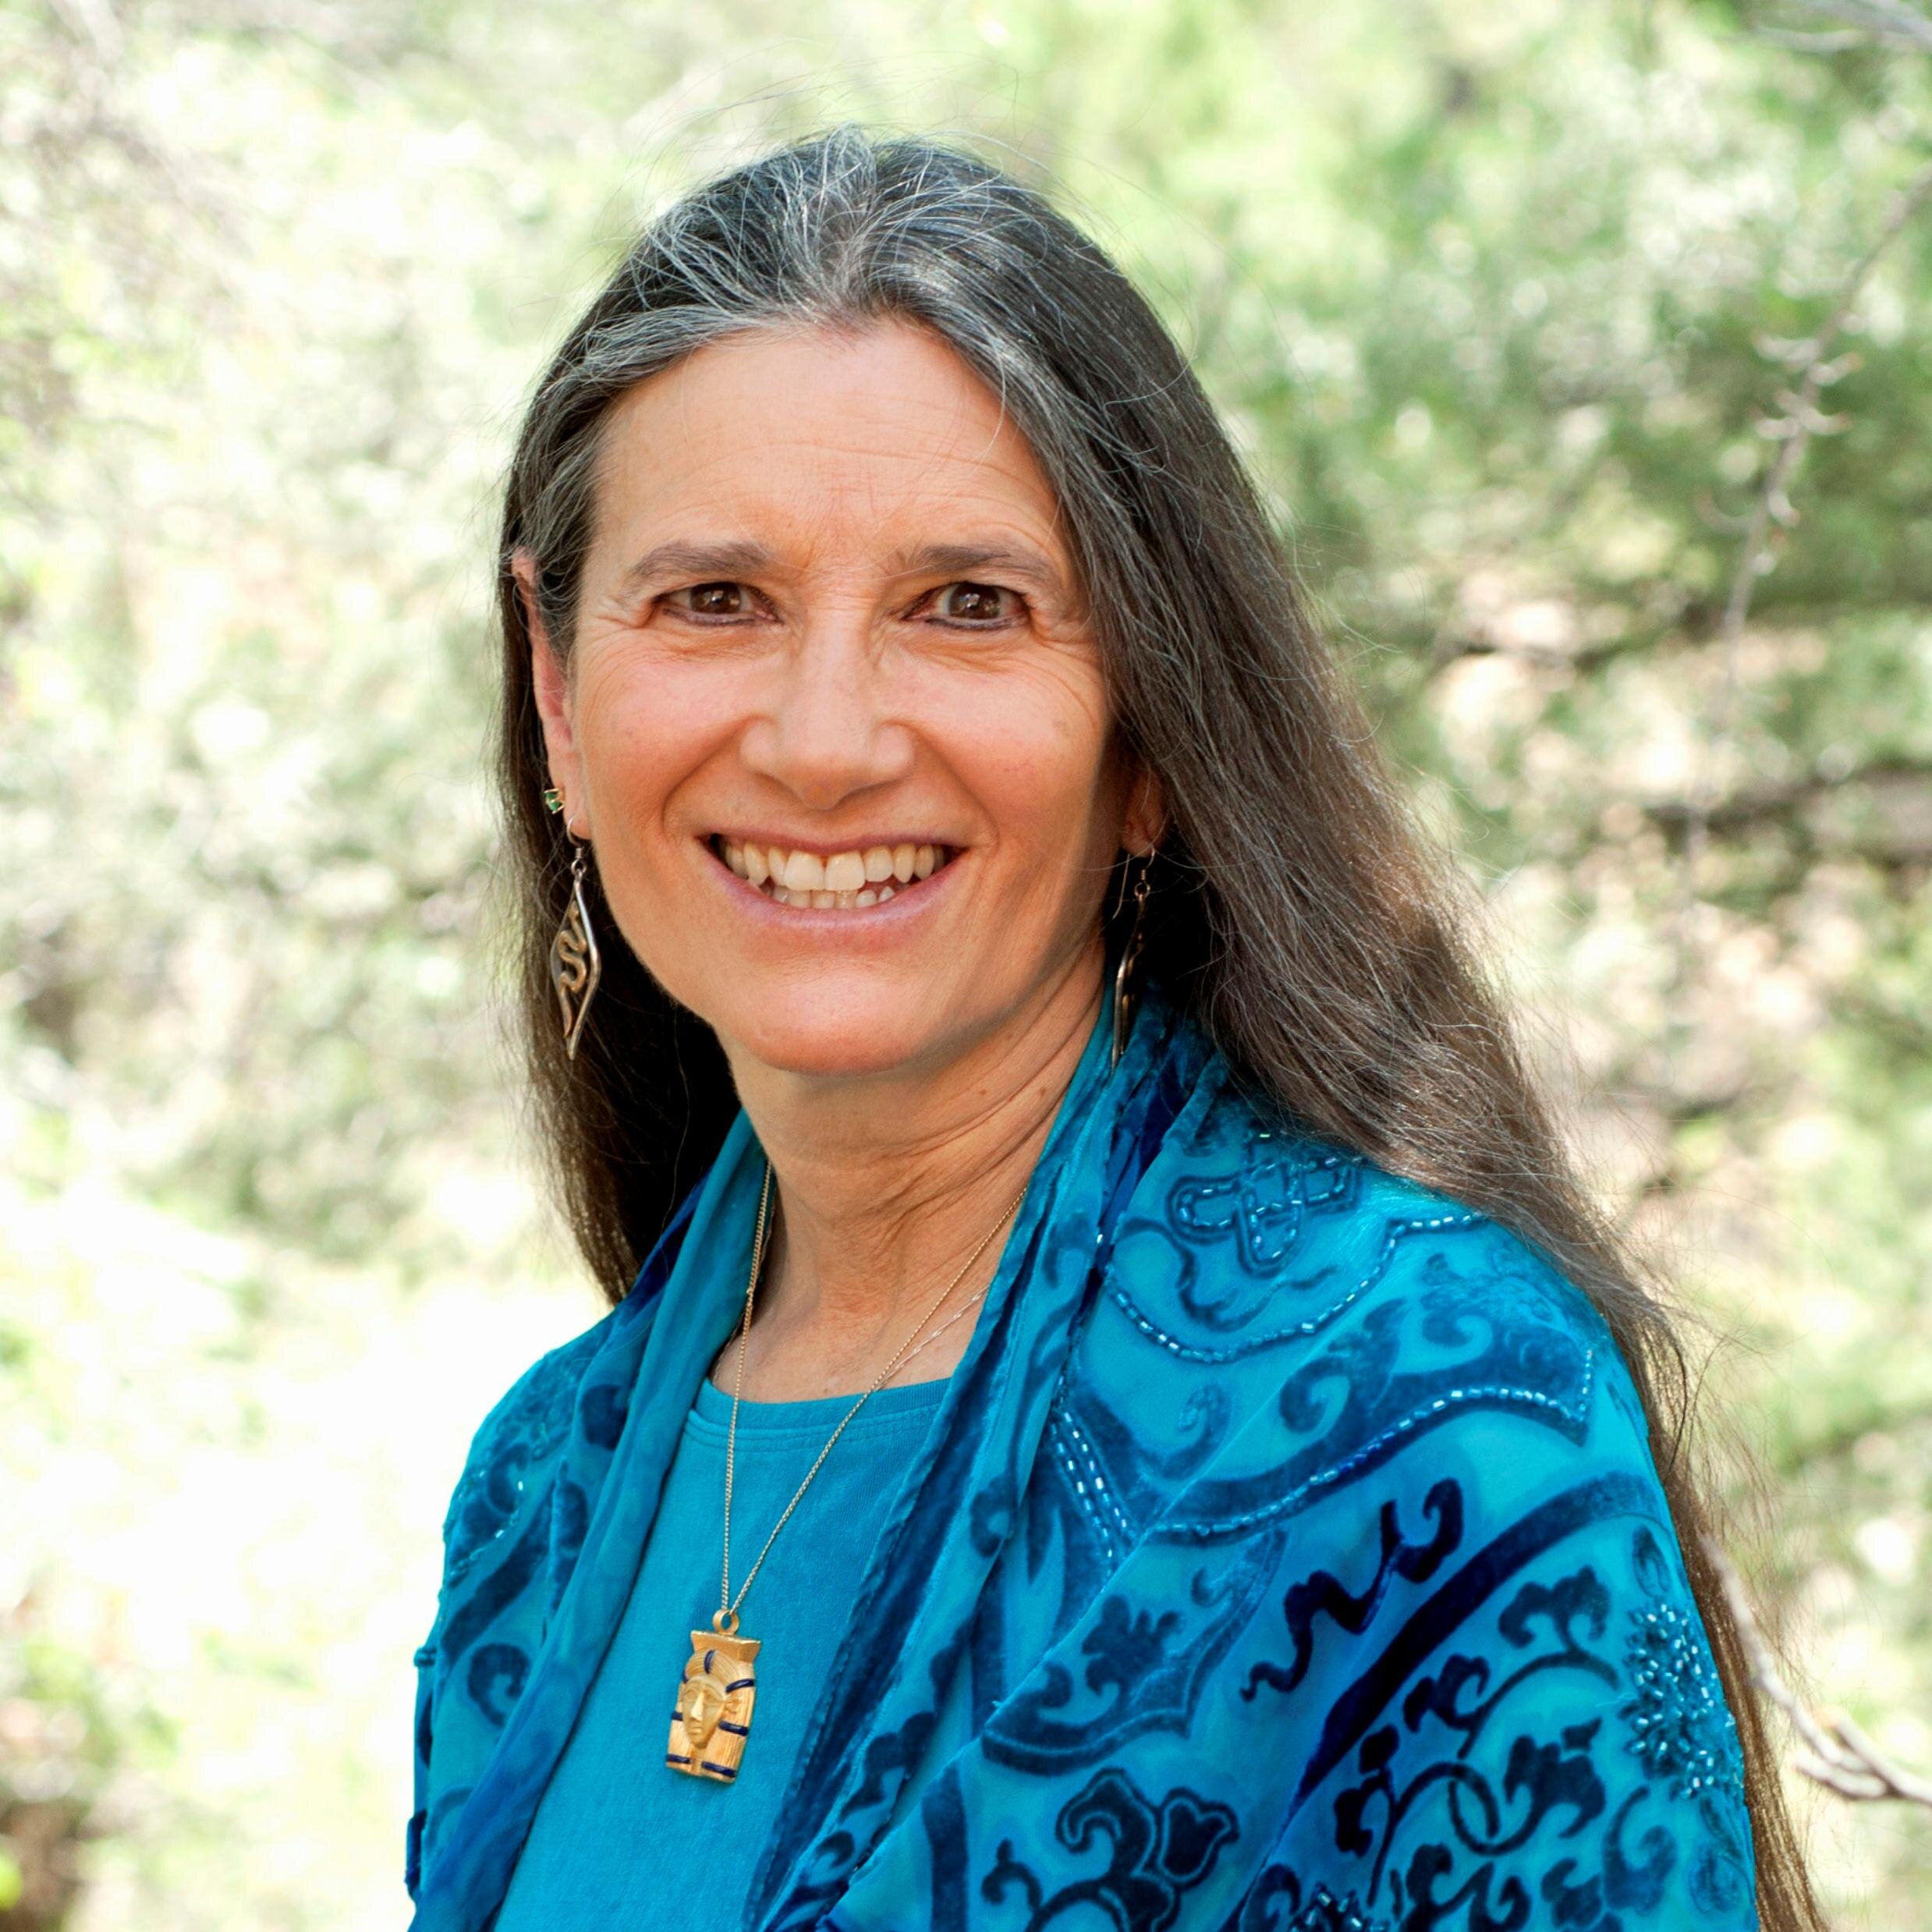 Shamanic Teacher and author of many bestselling books including The Book of Ceremony, Soul Retrieval, Medicine for the Earth, and Walking in Light.